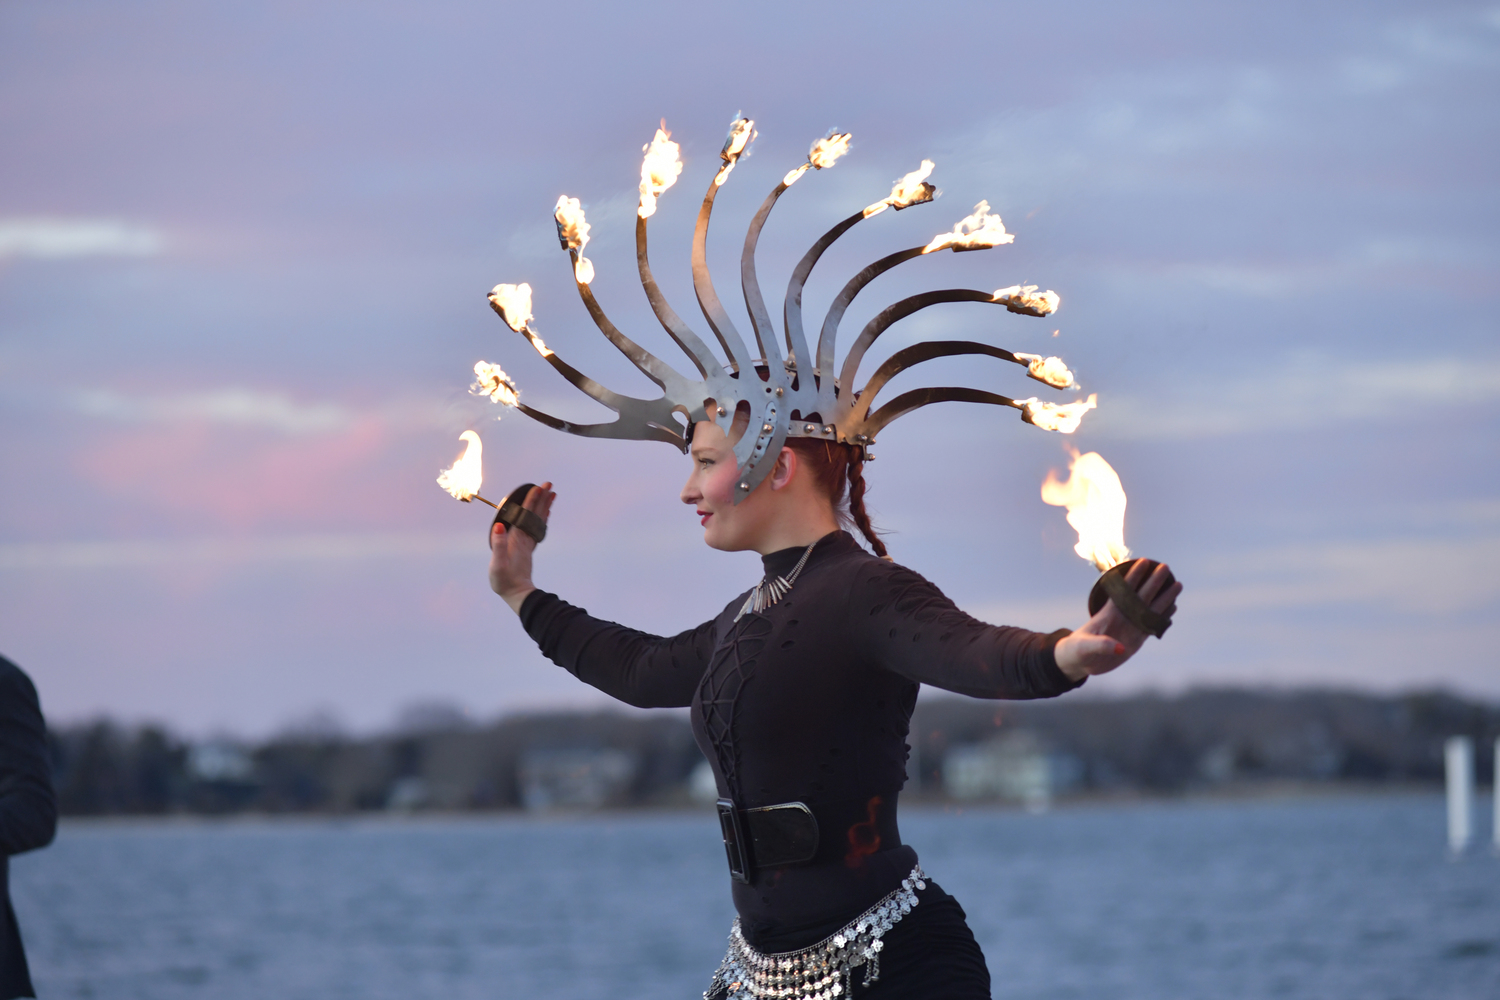 Fire dancer Anna Archaic performs with Keith Leaf and His Flaming Friends.